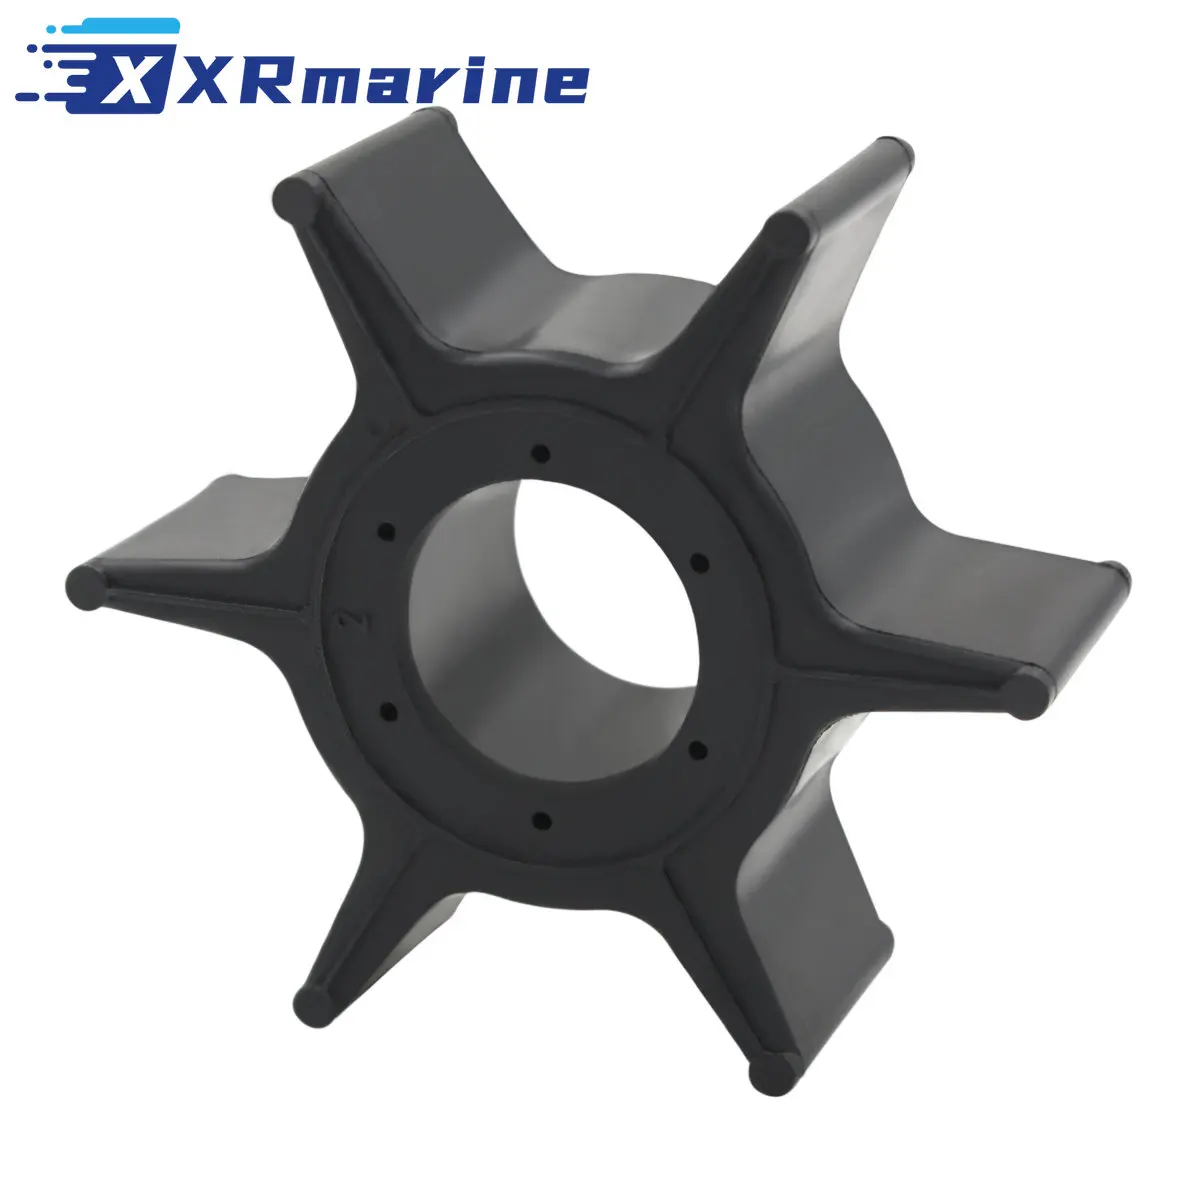 Water Pump Impeller 19210-ZV7-003 for Honda Marine Outboard BF25A BF25D BF30A BF30D 25HP 30HP Motors Replaces 18-3249